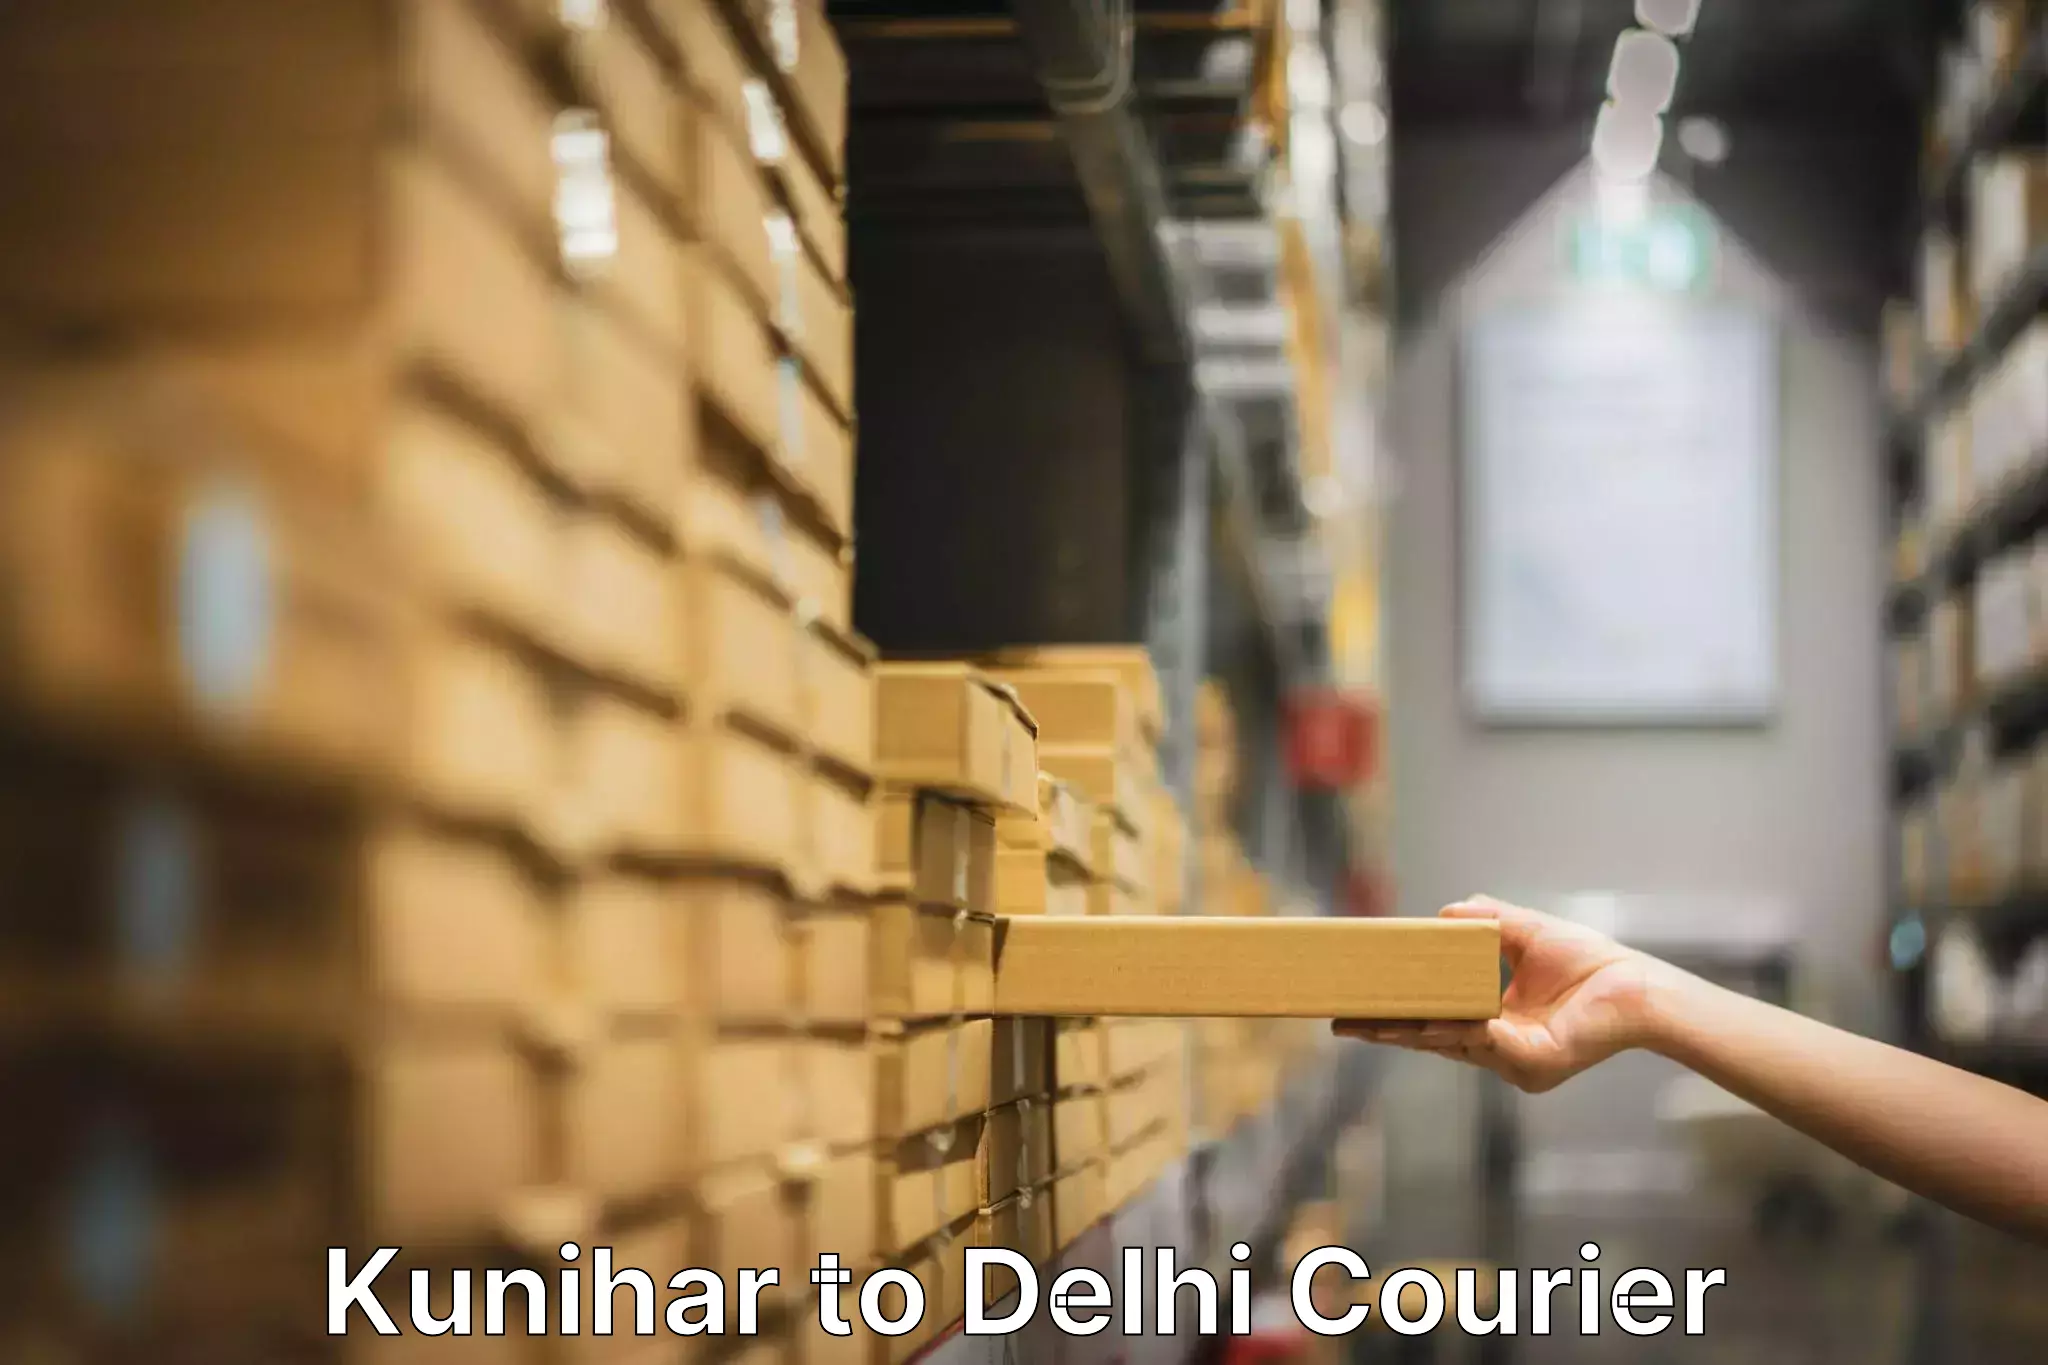 Quality relocation assistance Kunihar to Delhi